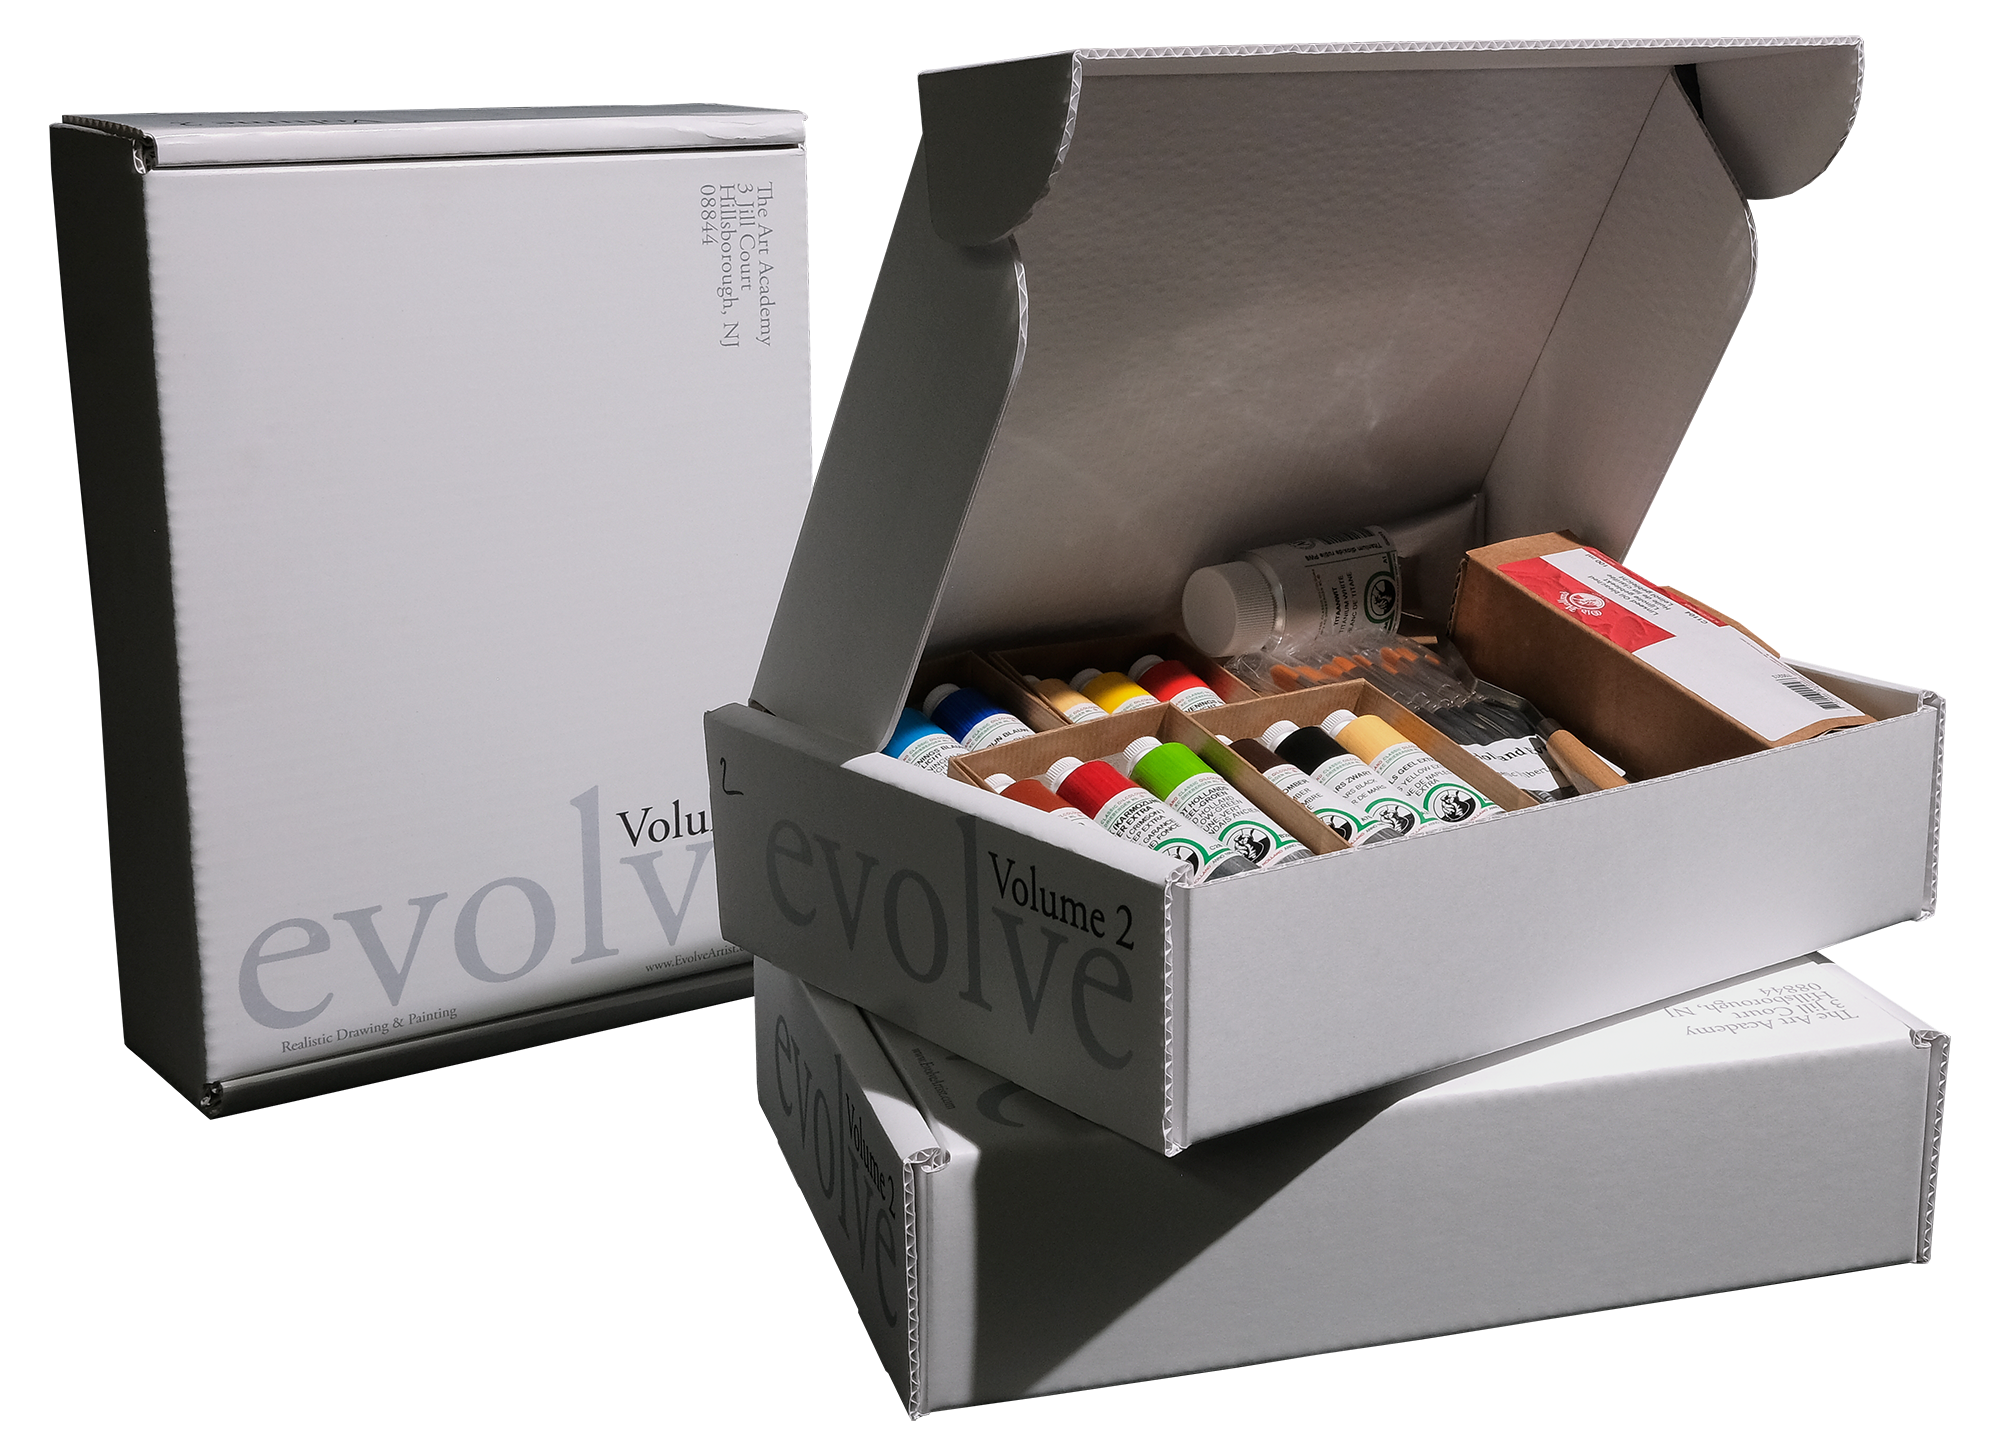 Evolve Artist supplies its students with all the materials they need to begin their learning journey.